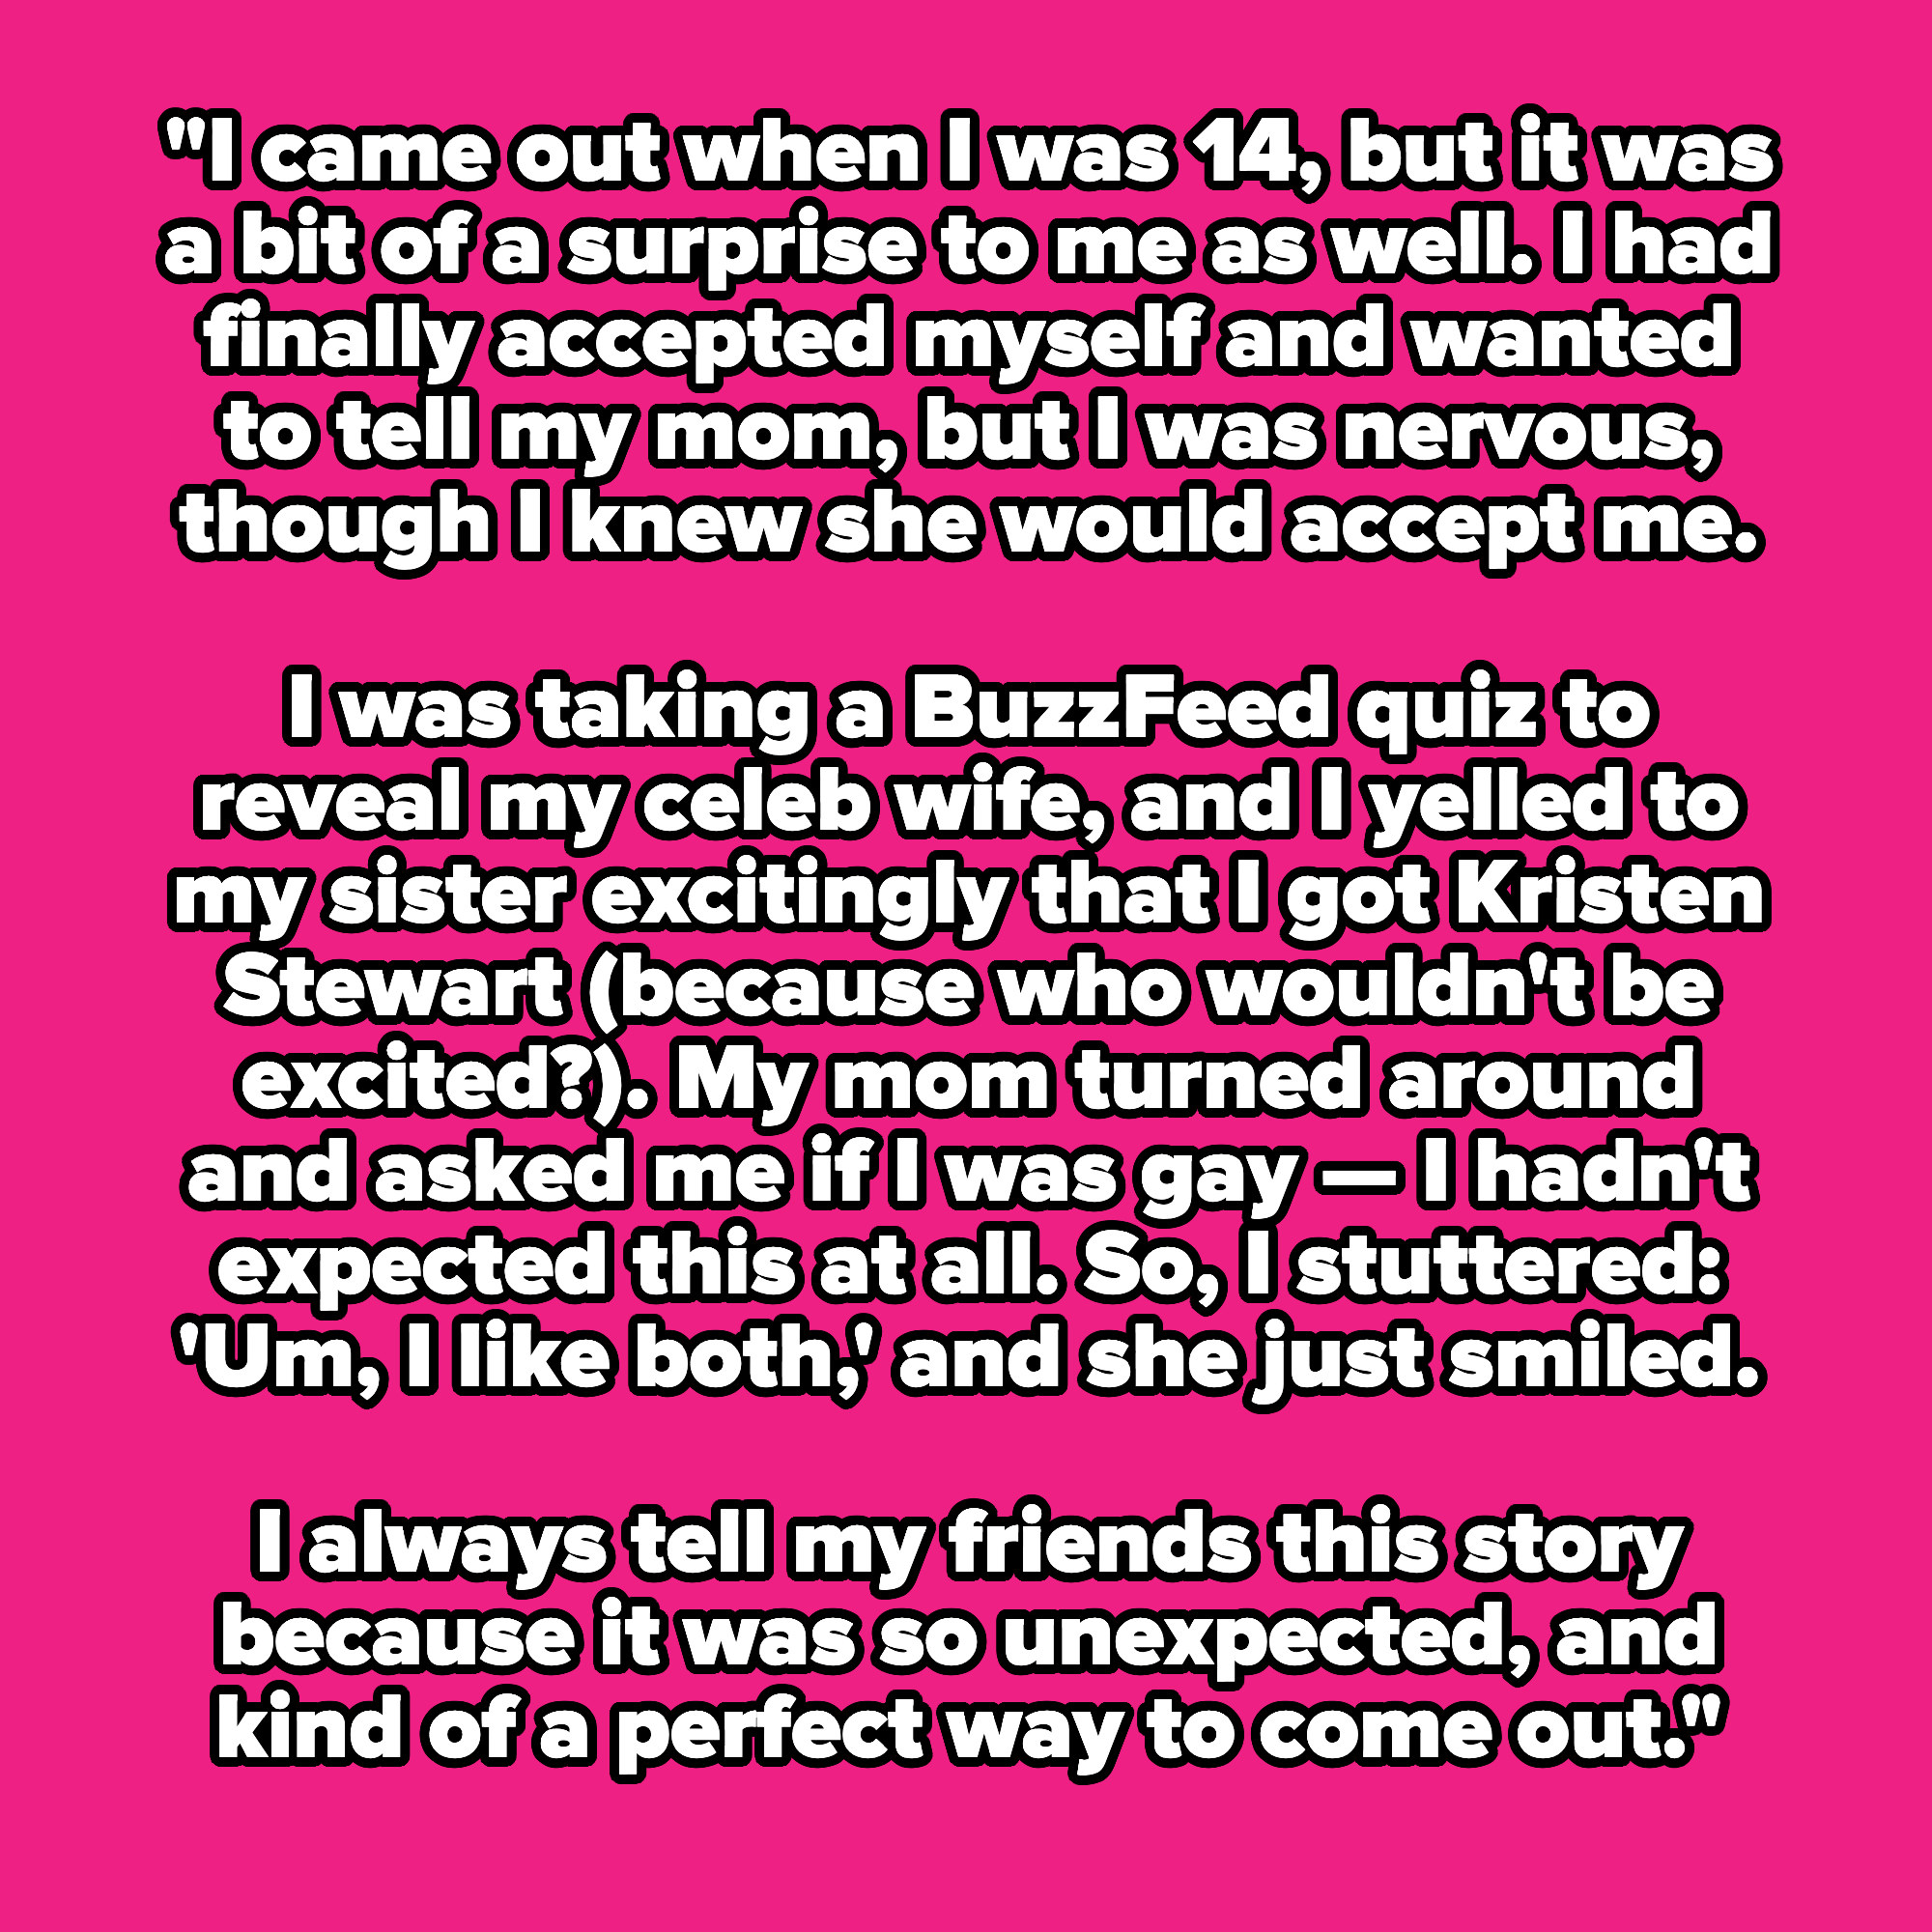 BuzzFeed user sharing their coming out story when they were 14 years old